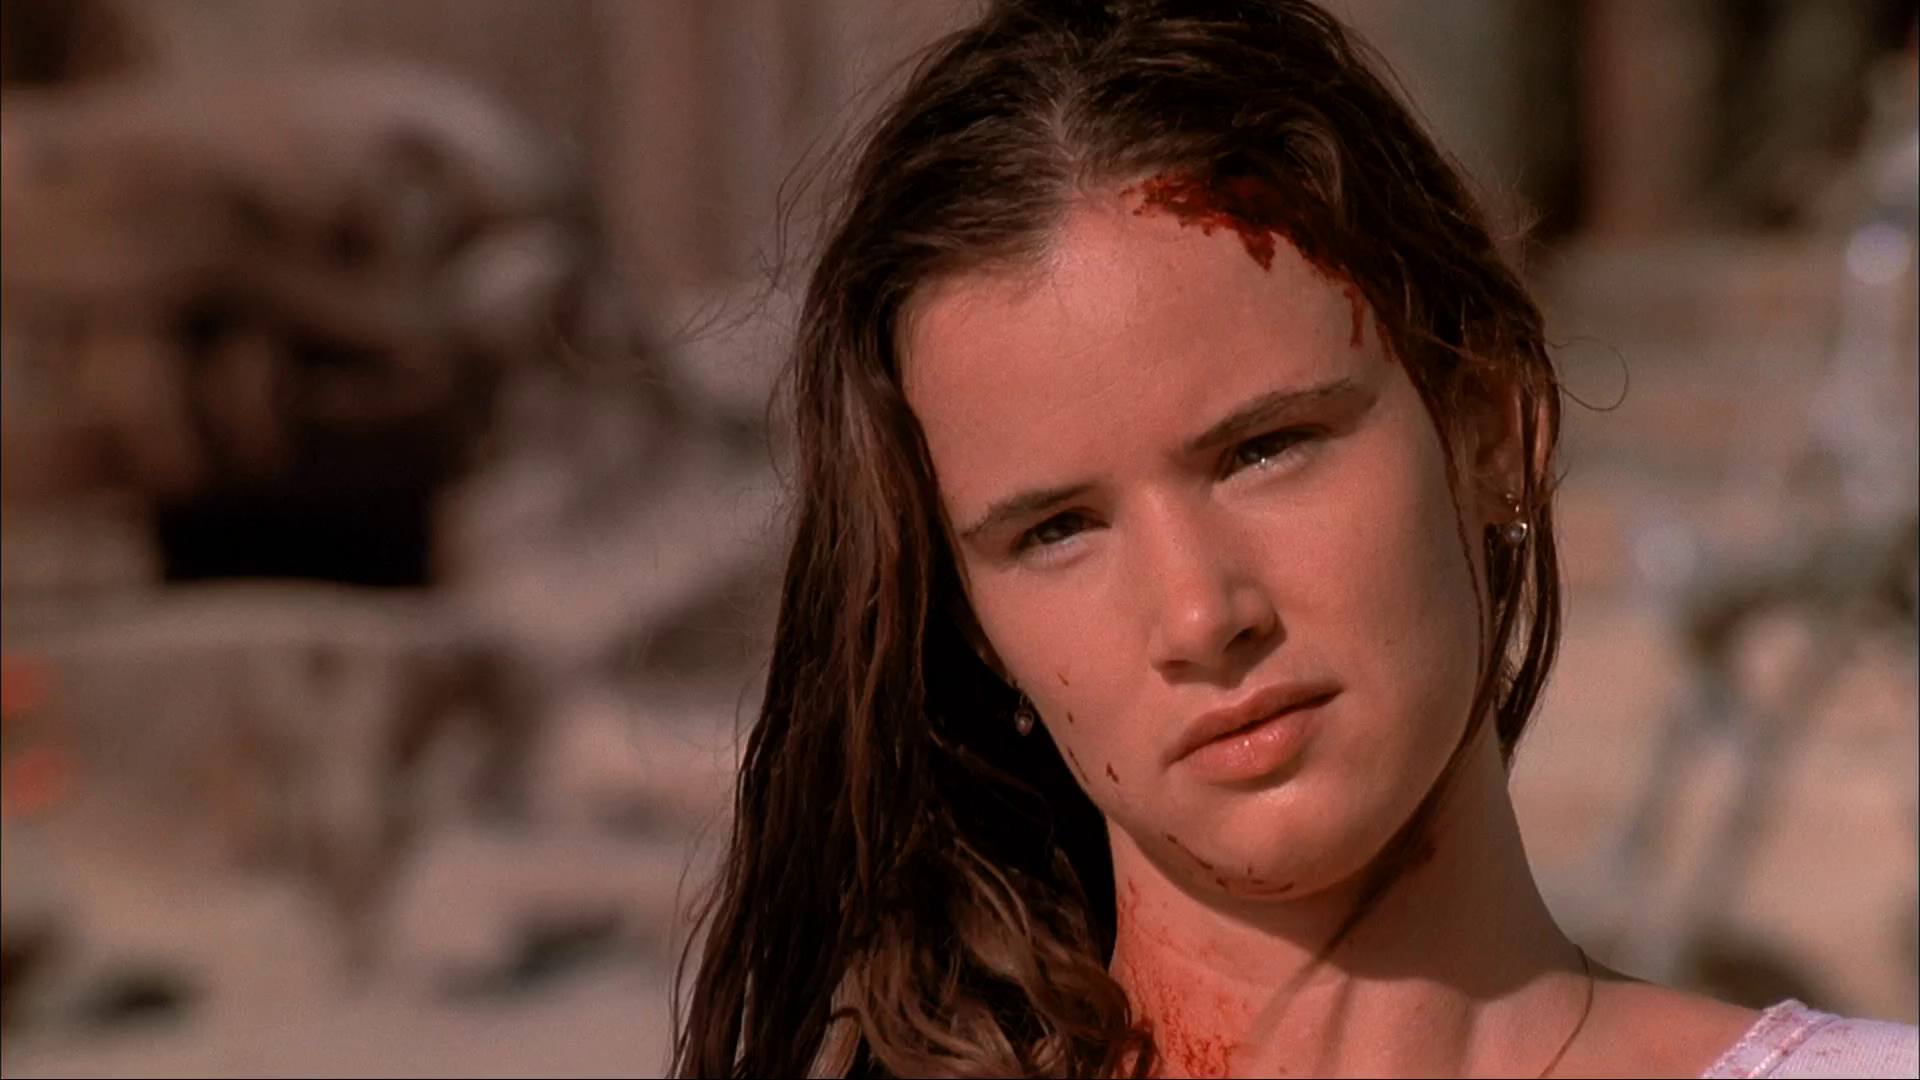 from dusk till dawn photo image. All Comments. Juliette lewis